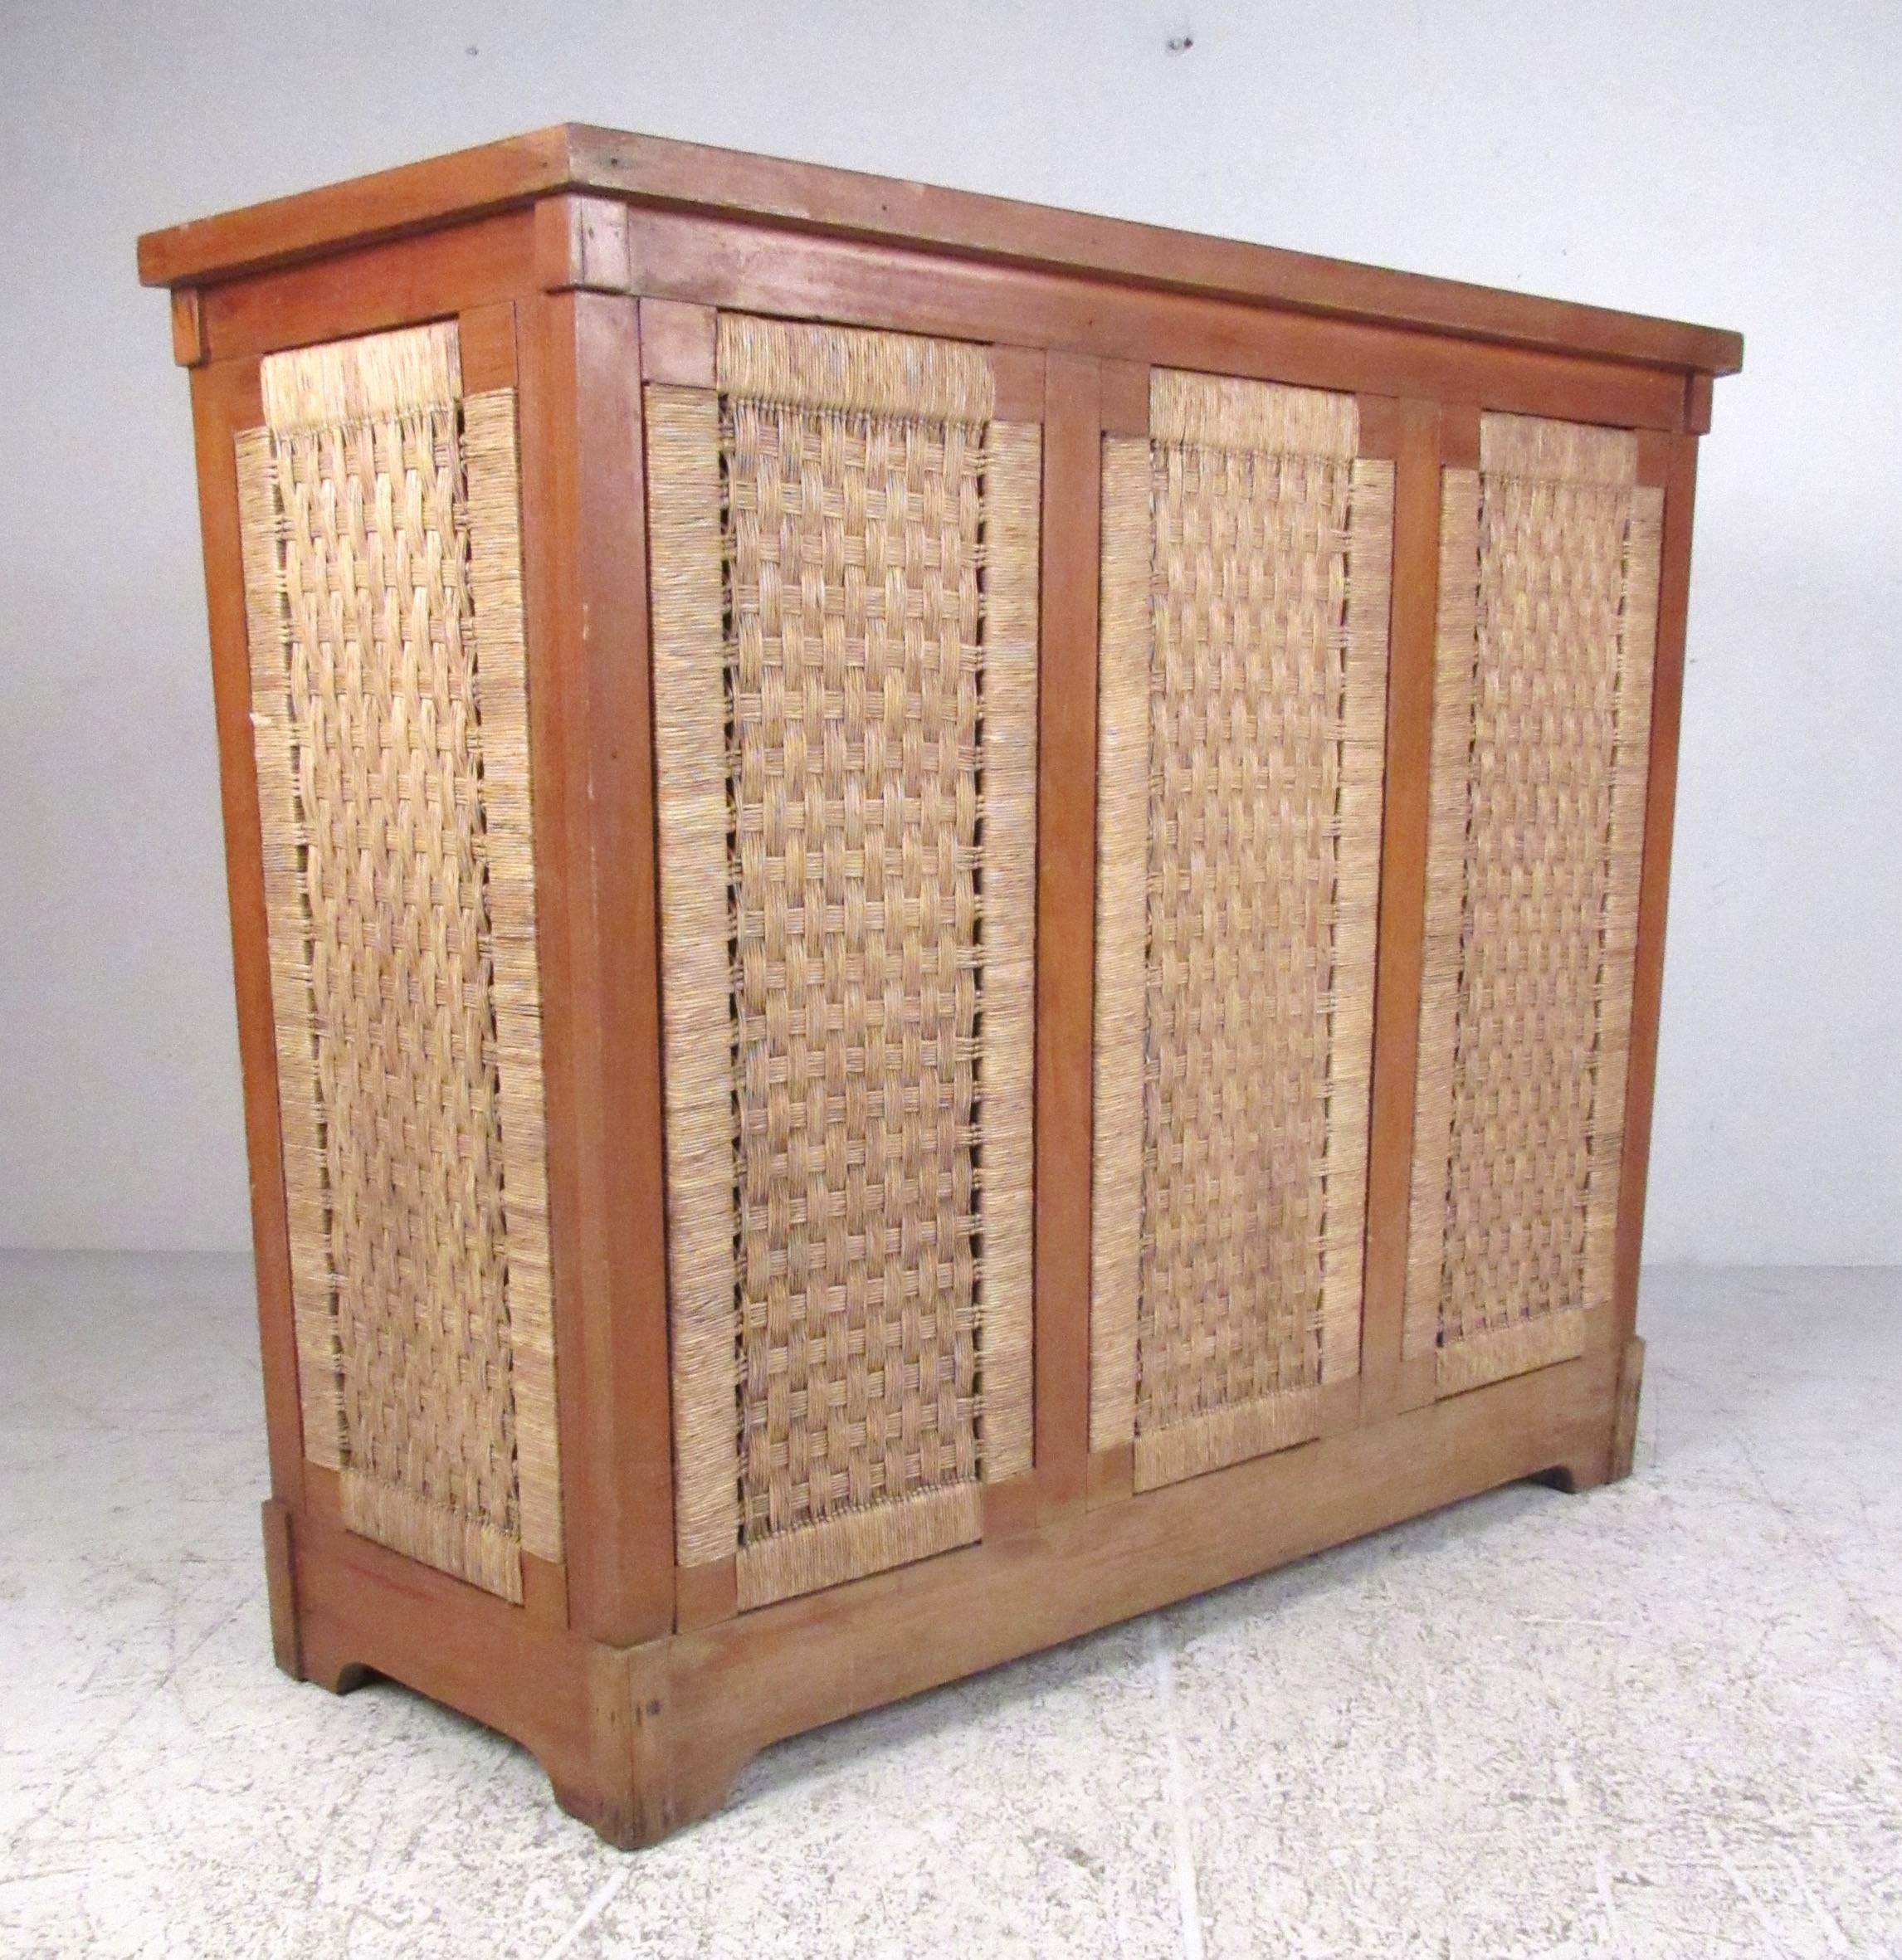 Unique freestanding dry bar constructed from tropical hardwood with woven rattan accent panels. Suitable for interior or exterior application, the bar offers both open and enclosed storage shelves and three rattan covered matching stools. Please